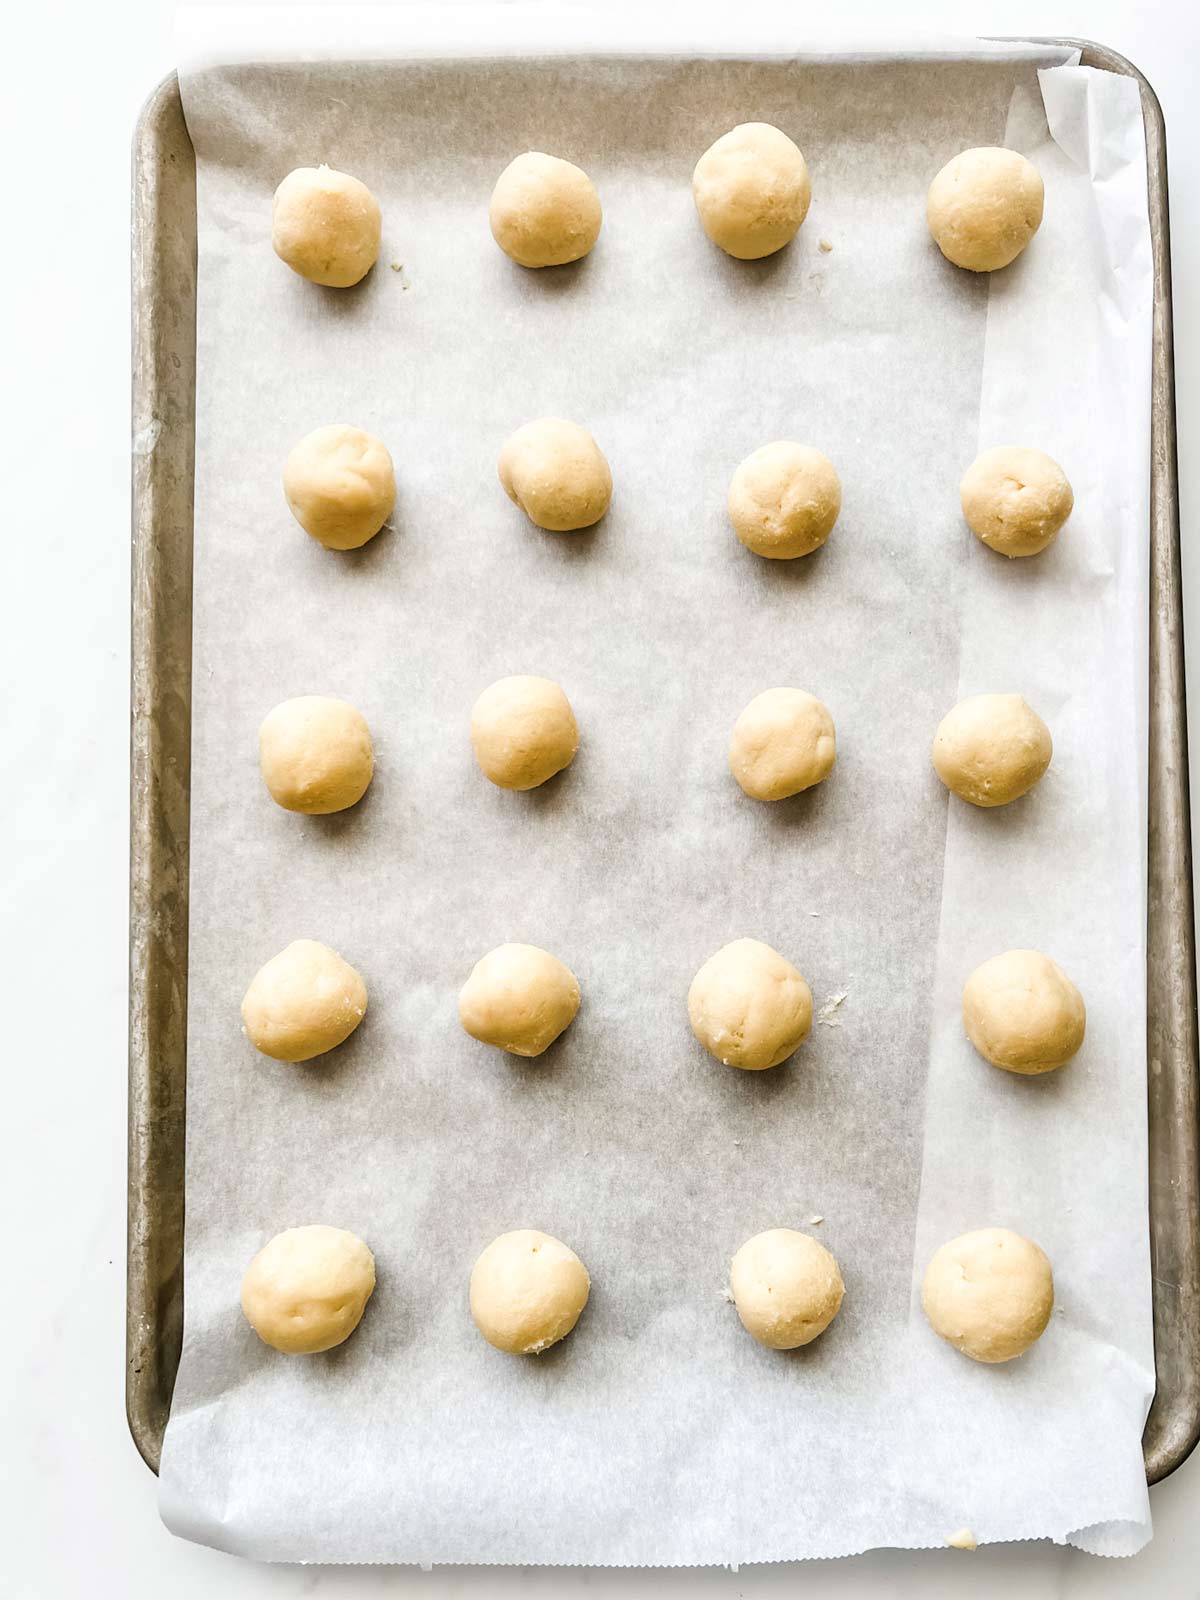 Thumbprint cookie dough rolled out on a parchment lined baking sheet.